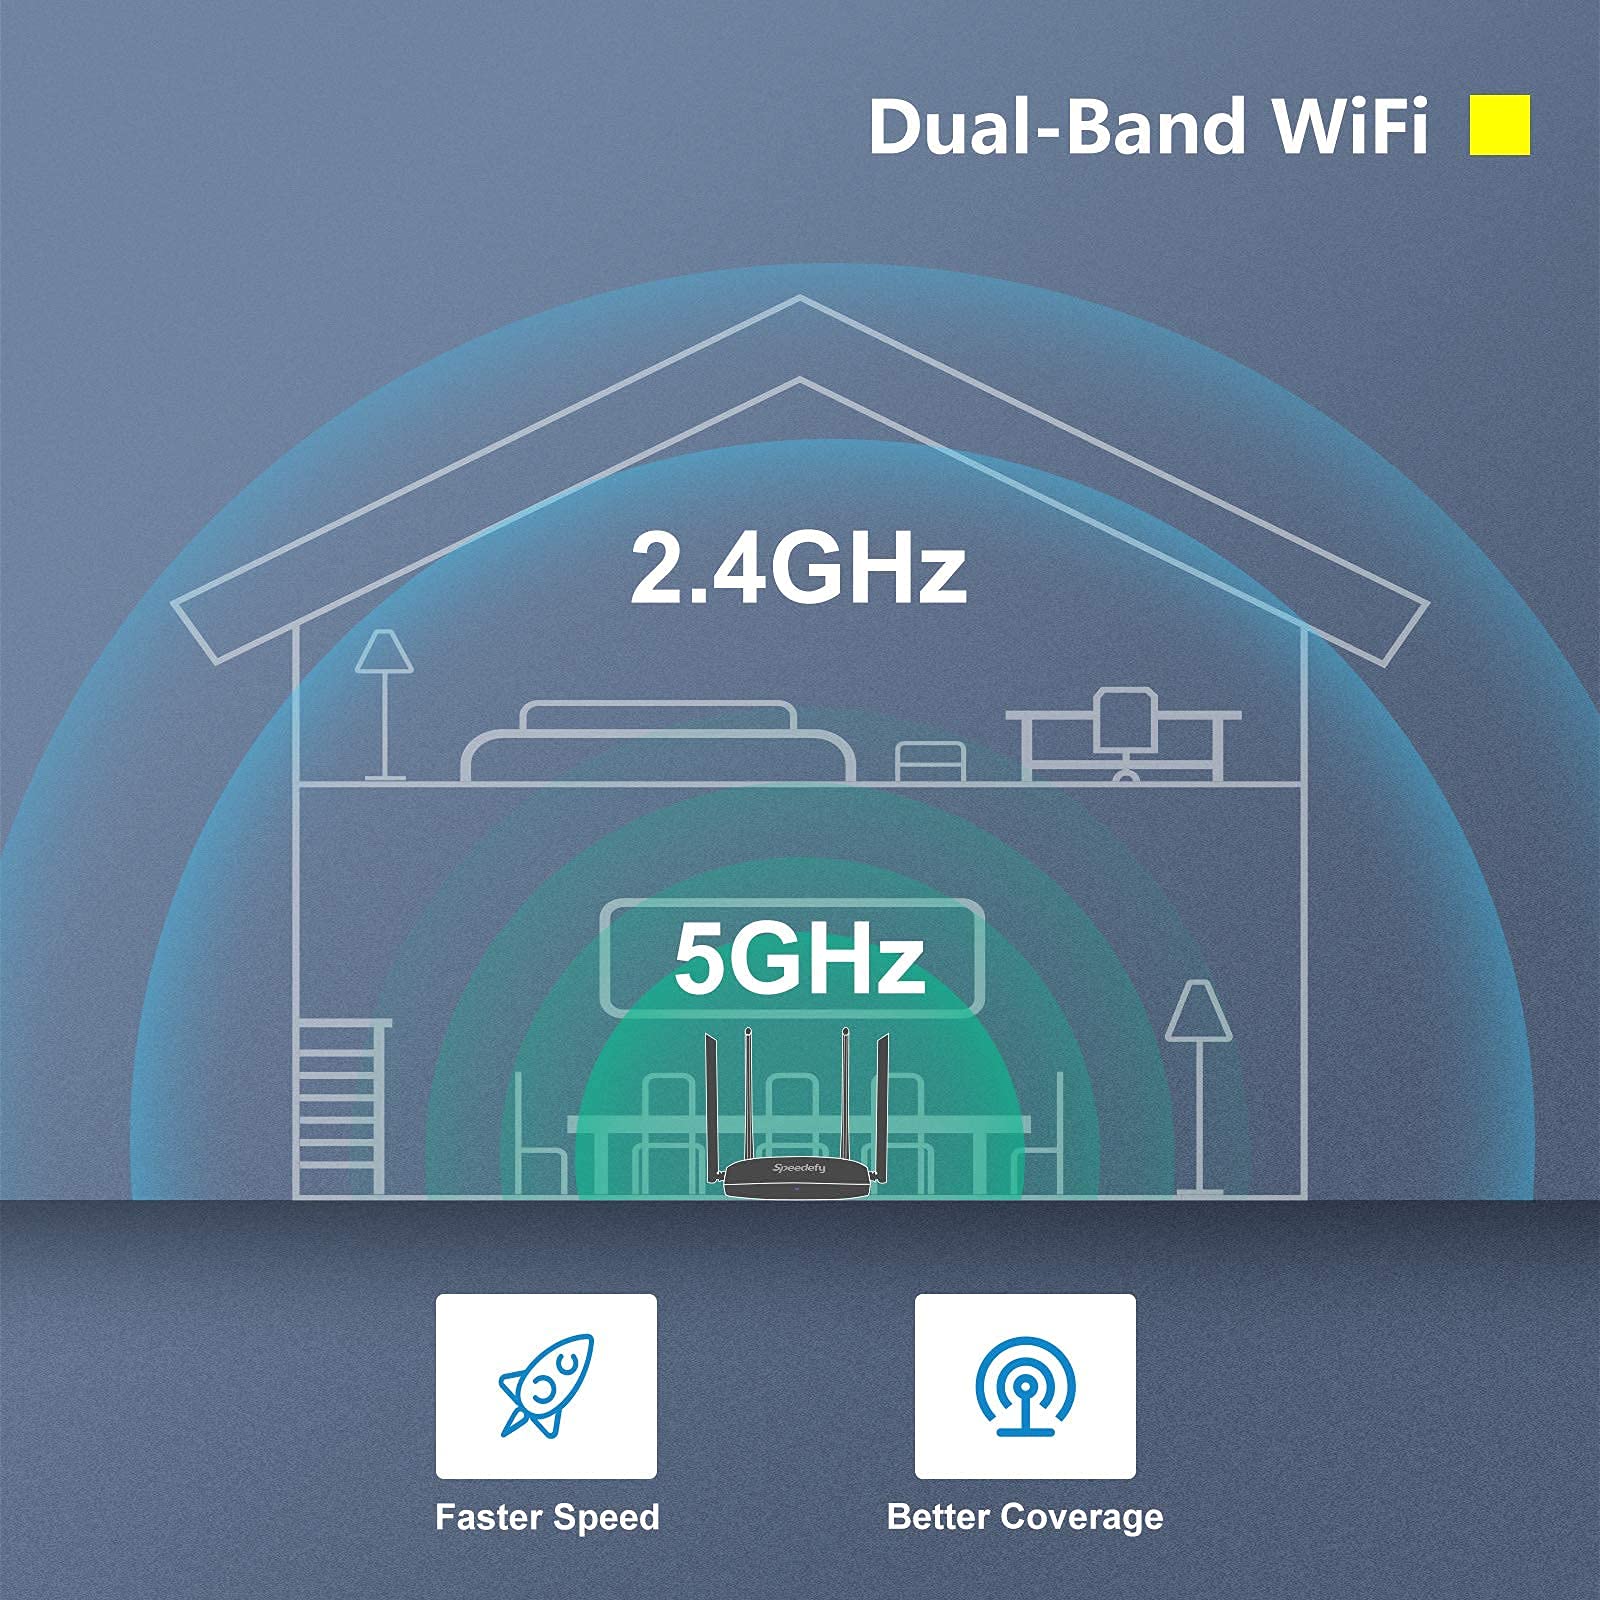 Speedefy WiFi Router for Home, AC1200 Gigabit Dual Band Computer Routers for Wireless Internet, Long Range Coverage, MU-MIMO, IPV6, Beamforming, AP Mode, Guest WiFi and Parental Control (Model K4)